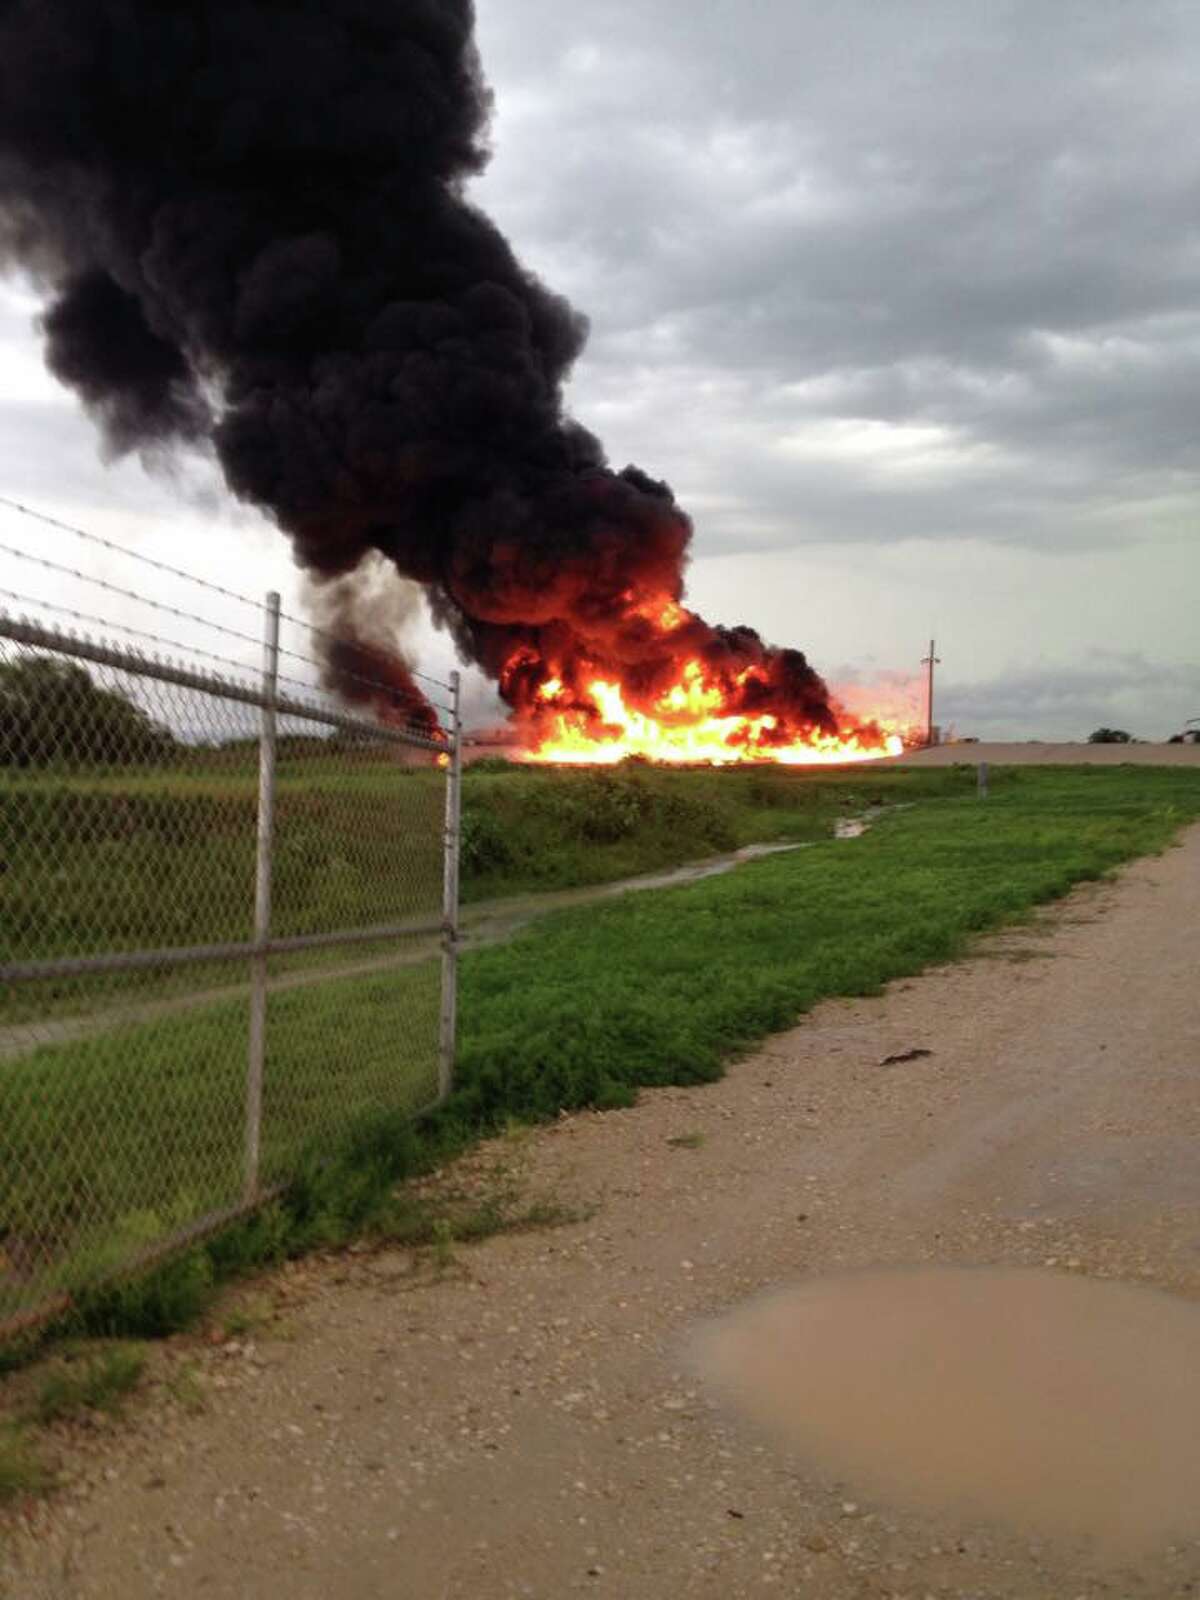 A large explosion occurred Friday afternoon at an oil facility north of Karnes City that sent flames more than a hundred feet into the air, the Karnes County Sheriff’s Office confirmed.